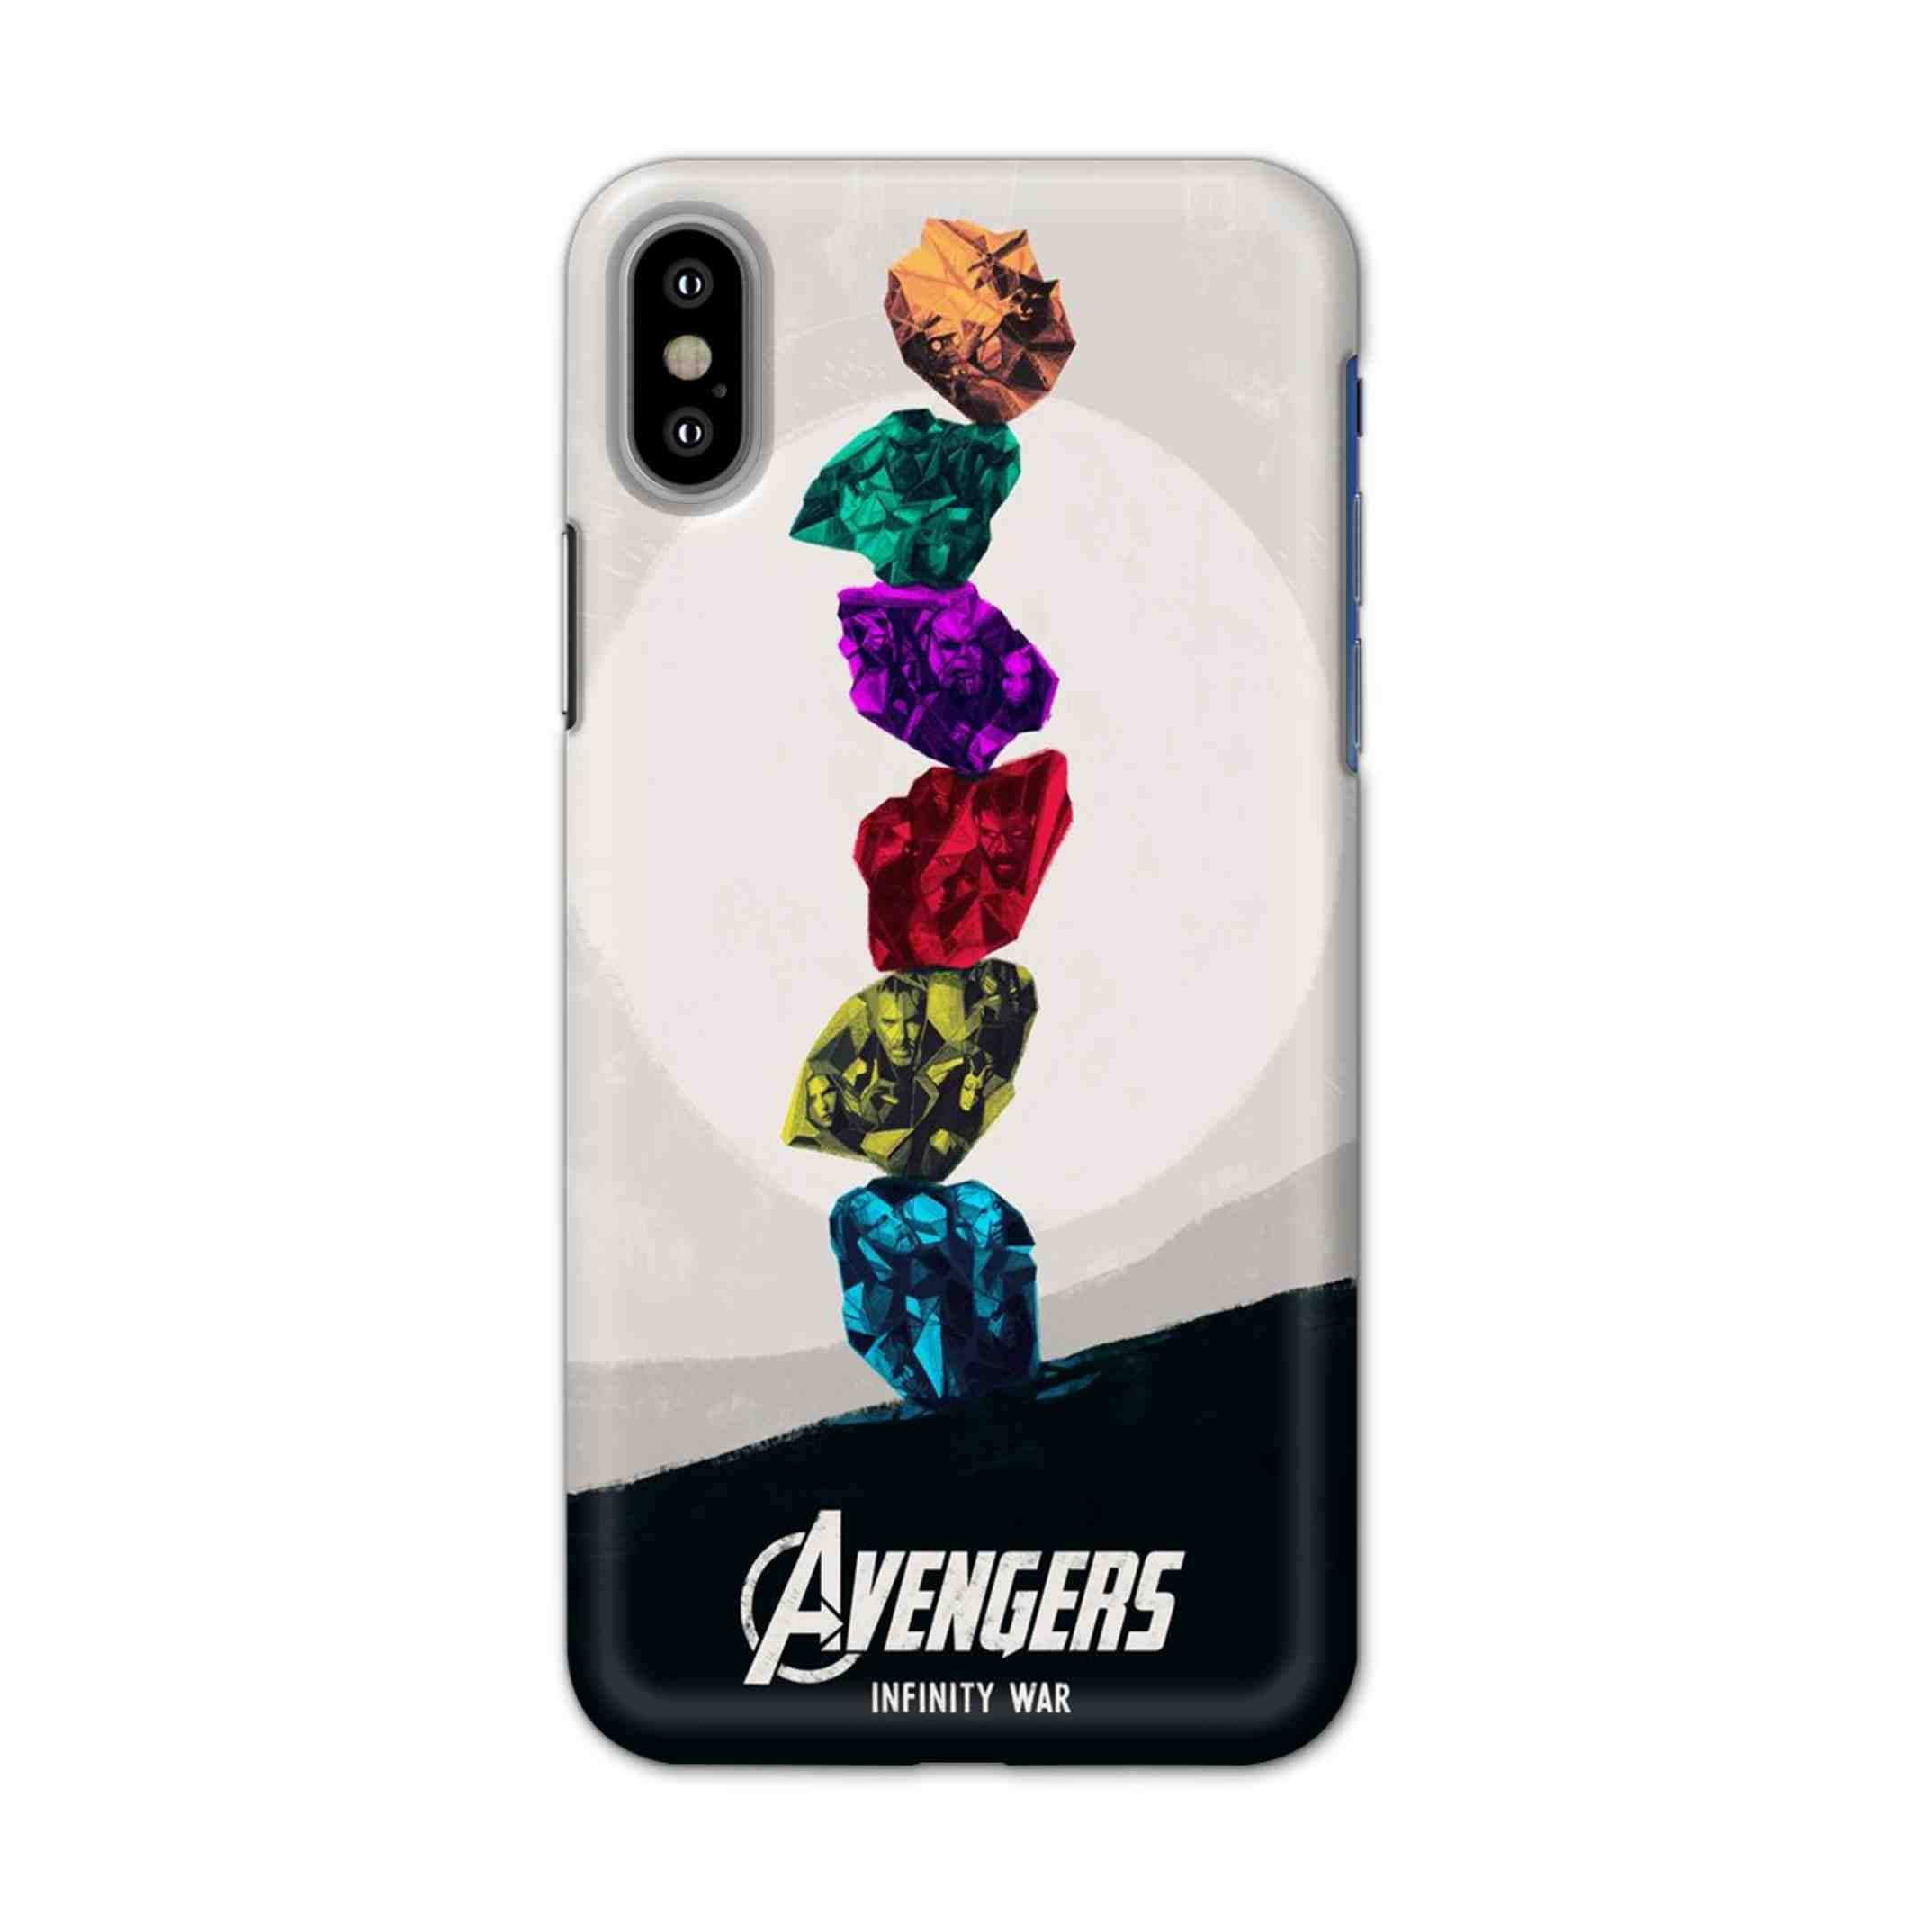 Buy Avengers Stone Hard Back Mobile Phone Case/Cover For iPhone X Online